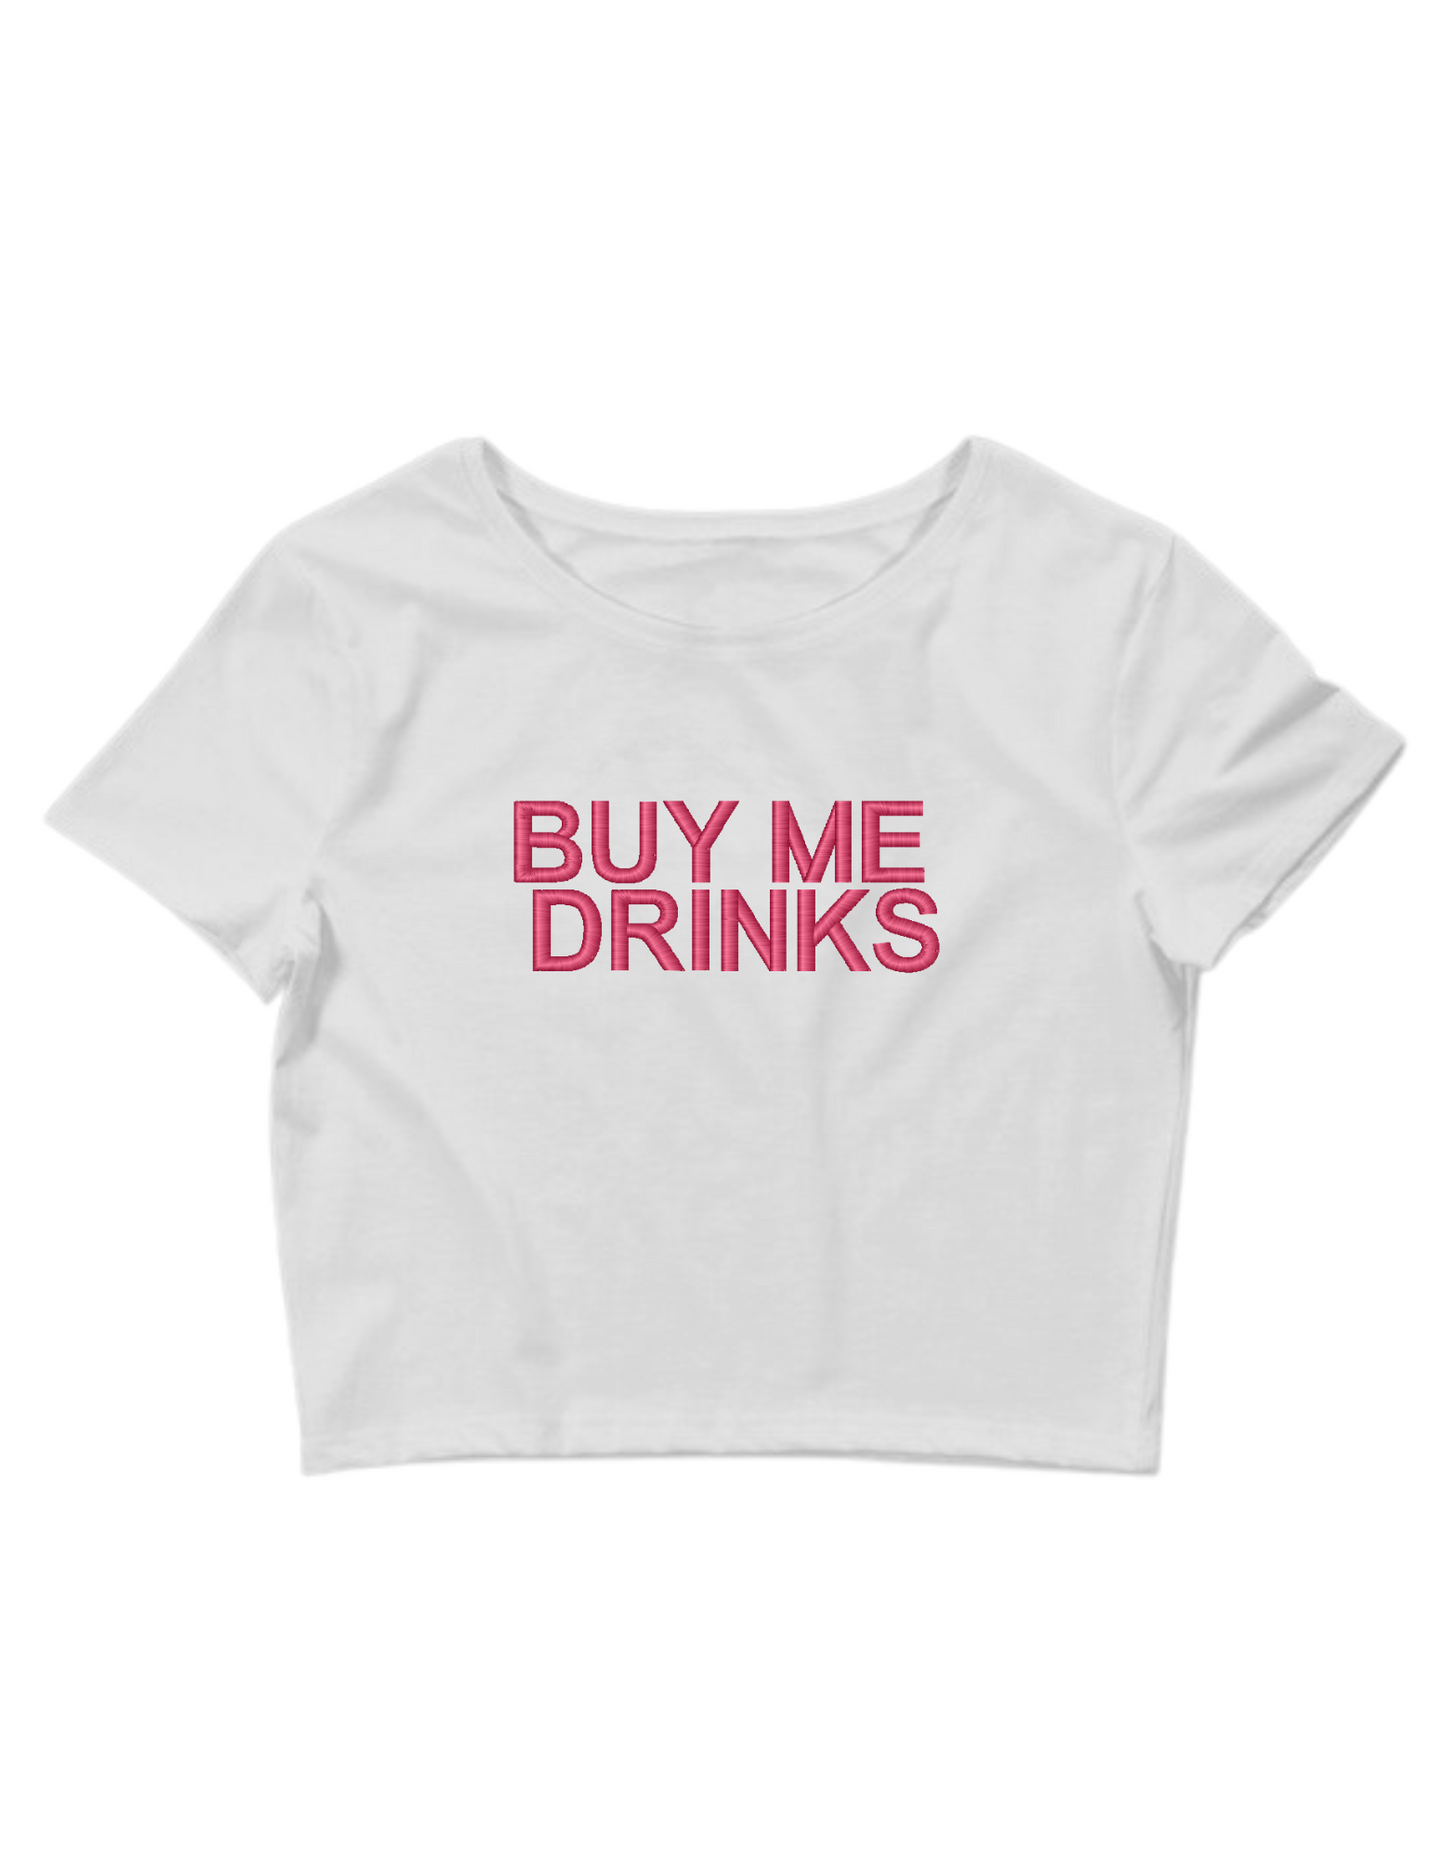 Embroidered ‘Buy Me Drinks’ Cropped, Short Sleeve, Petite fit, Adult, Female, T-Shirt